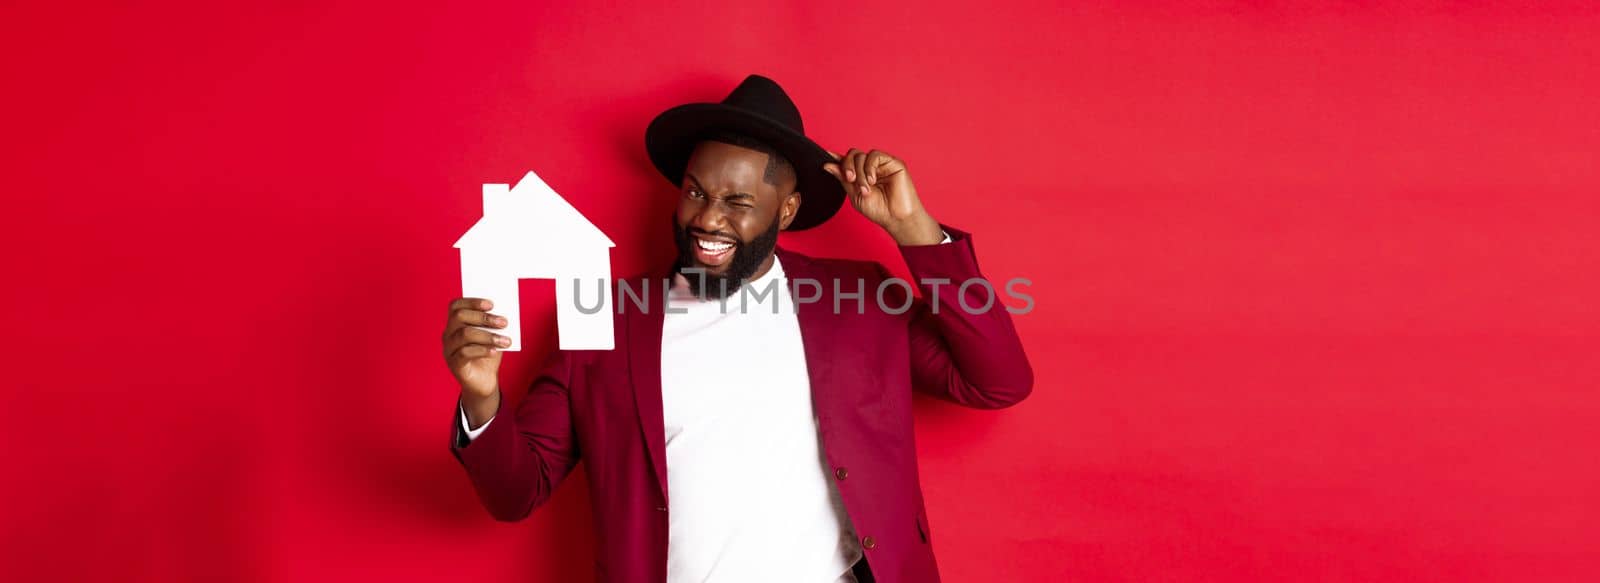 Real estate. Cheerful Black man showing paper house and smiling, recommending broker, standing over red background.